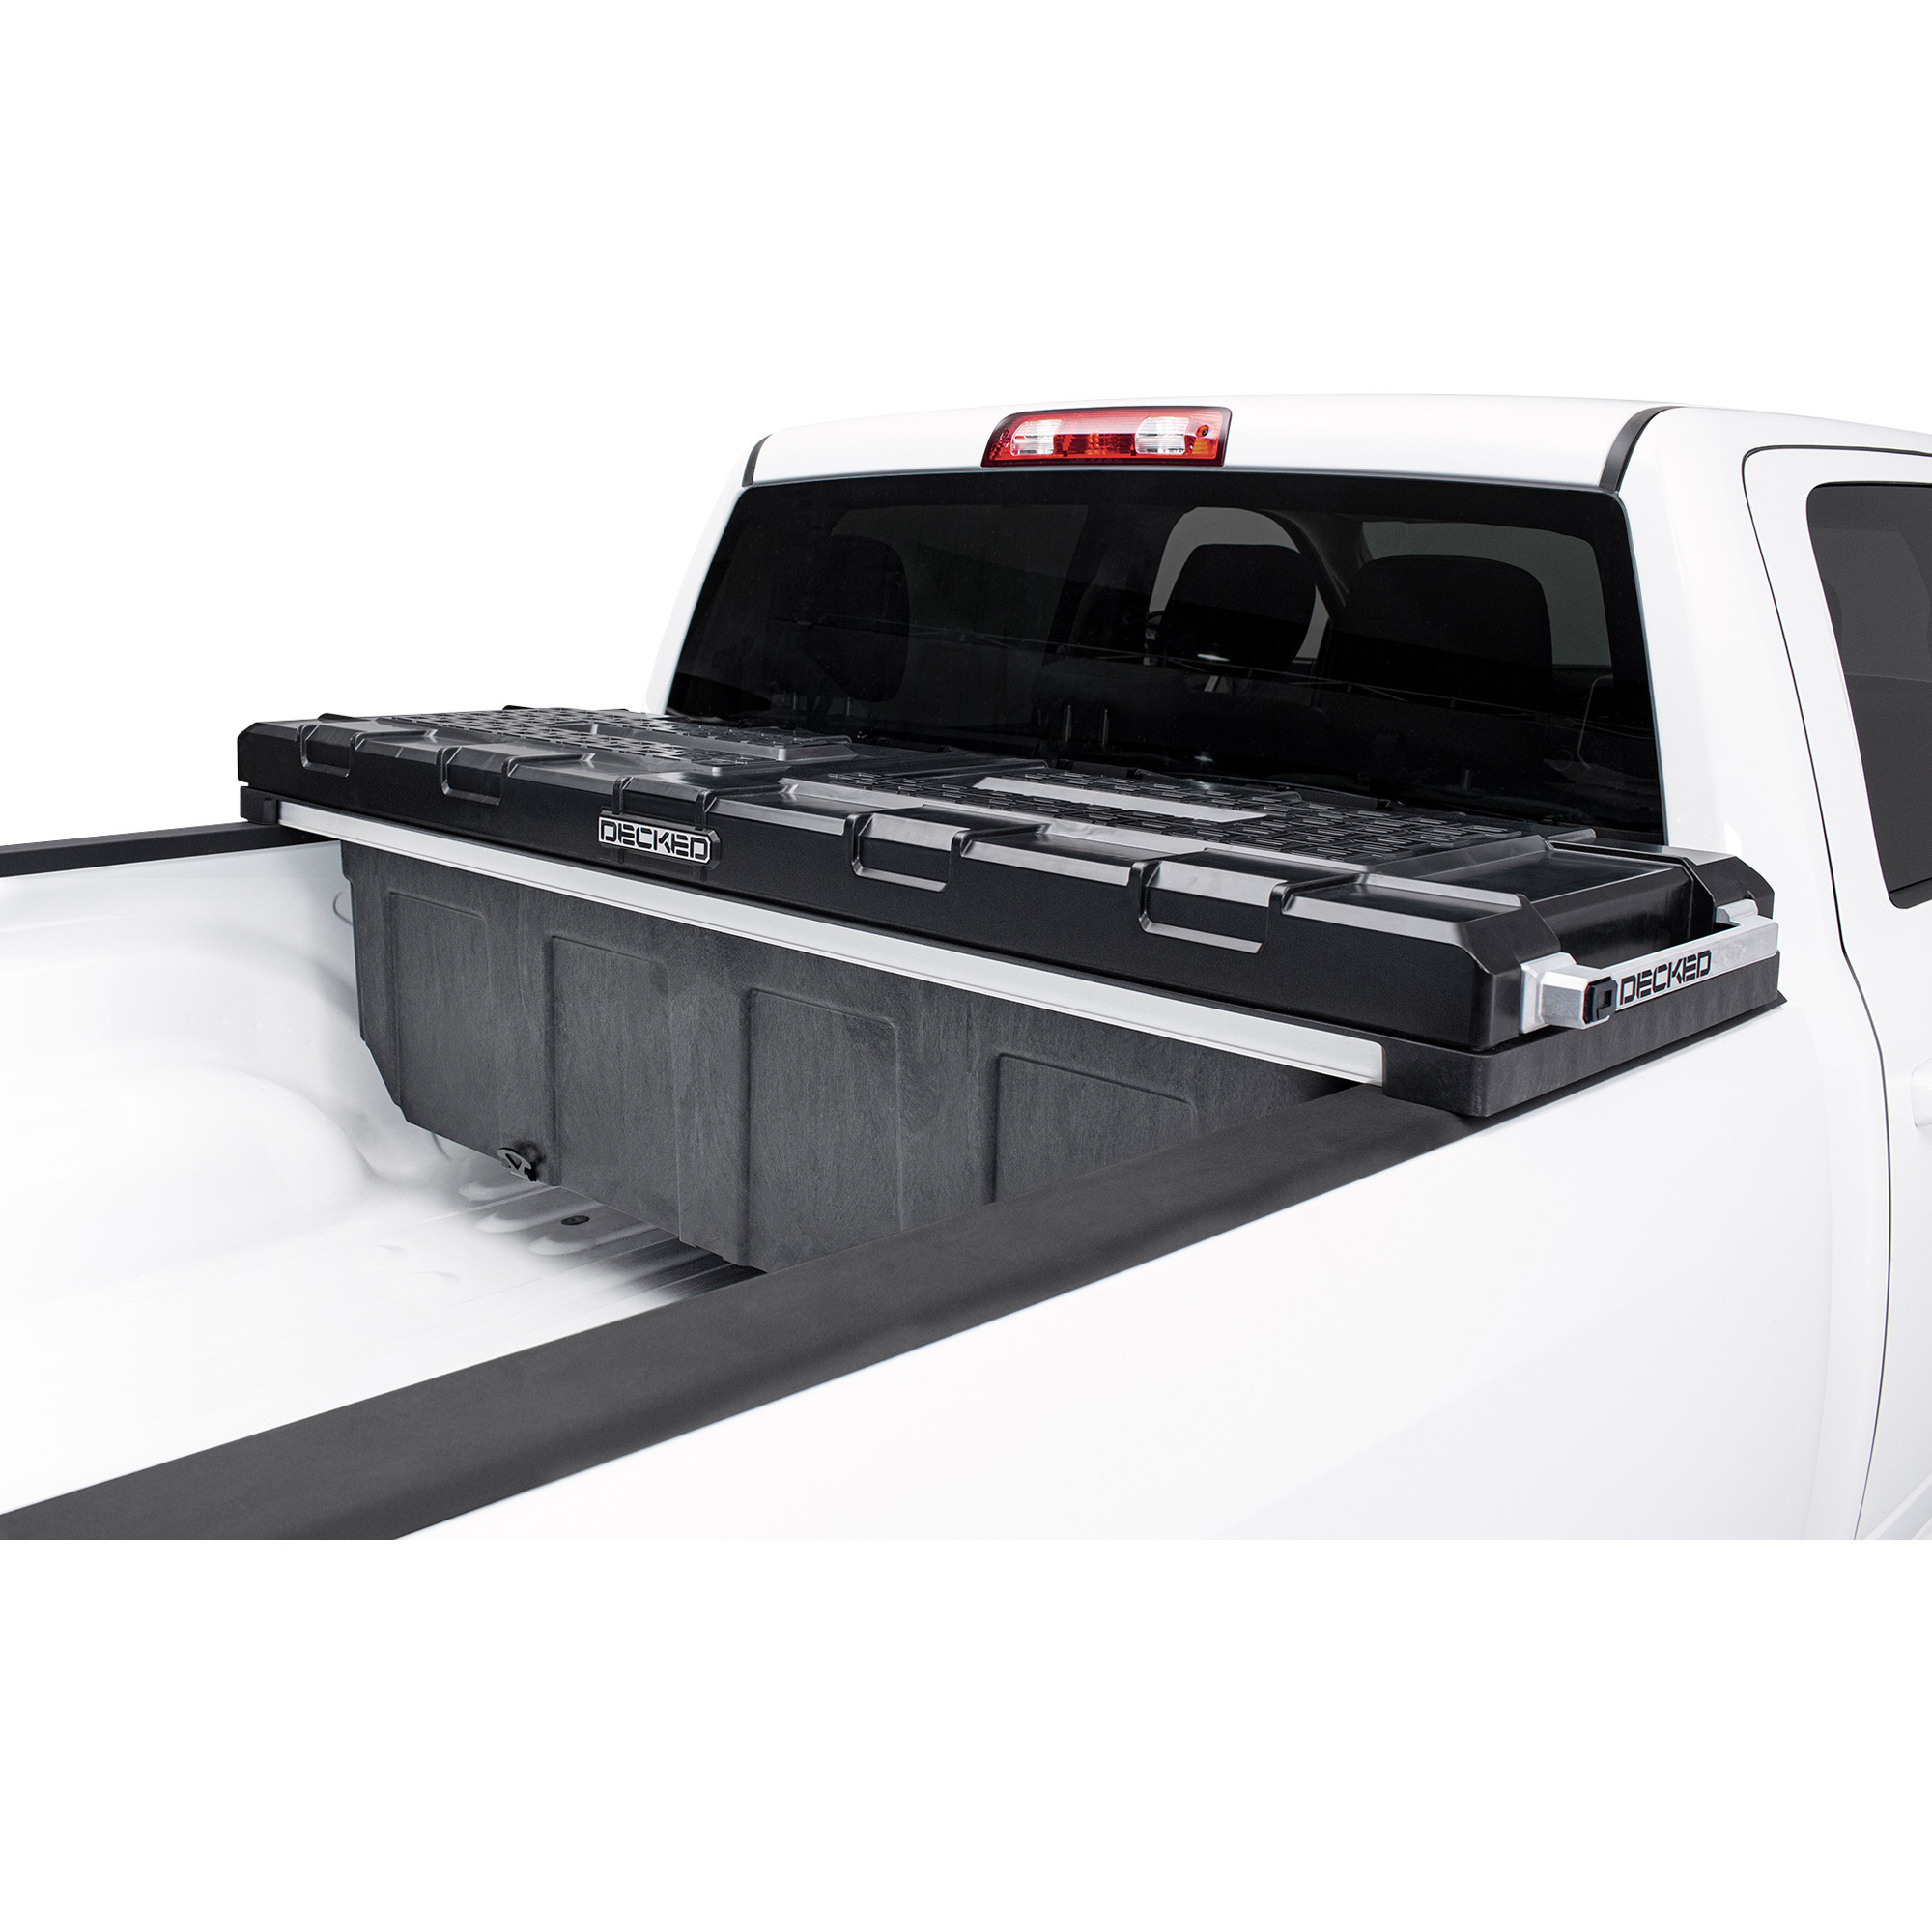 DECKED Full-Size Truck Toolbox â 72Inch W x 22Inch D x 20.5Inch H, Model TBFD